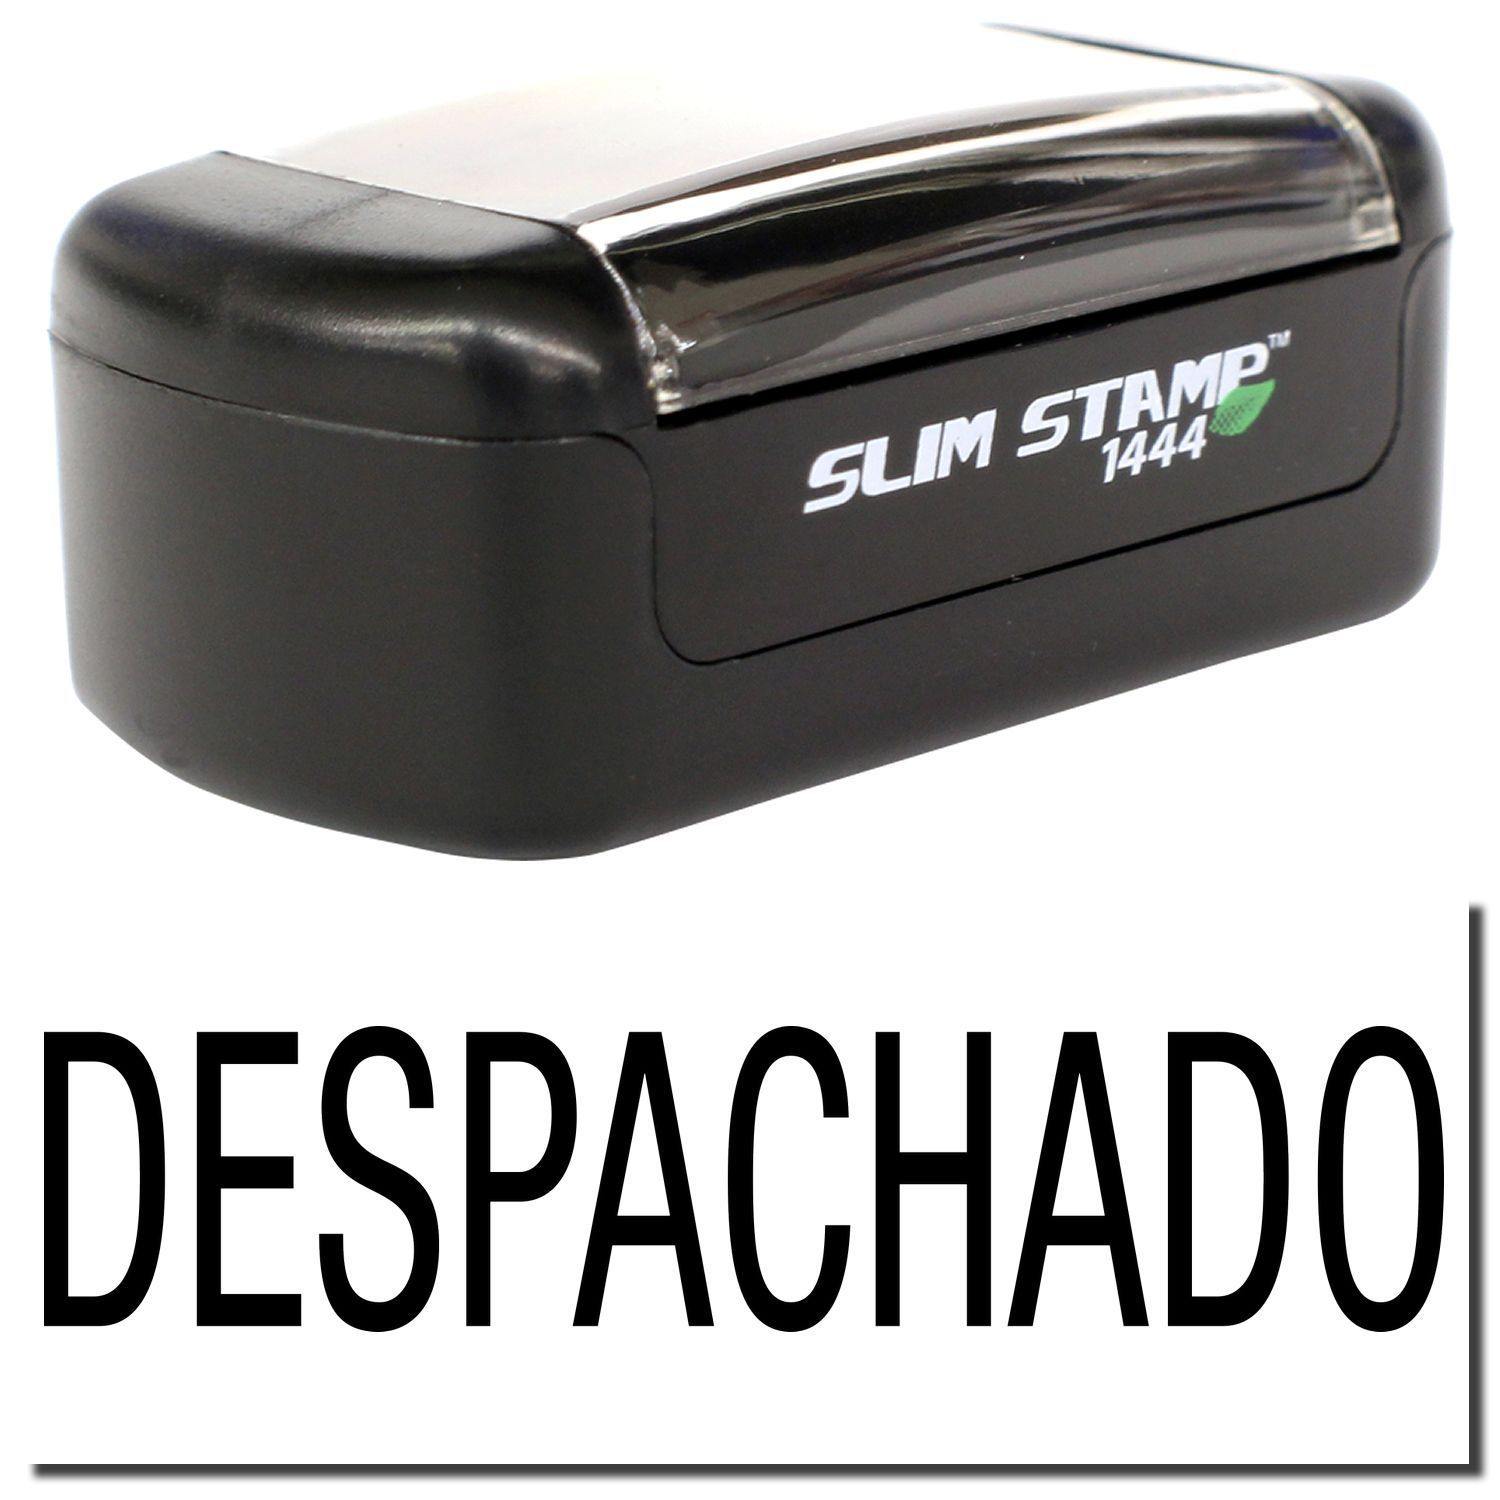 A stock office pre-inked stamp with a stamped image showing how the text "DESPACHADO" is displayed after stamping.